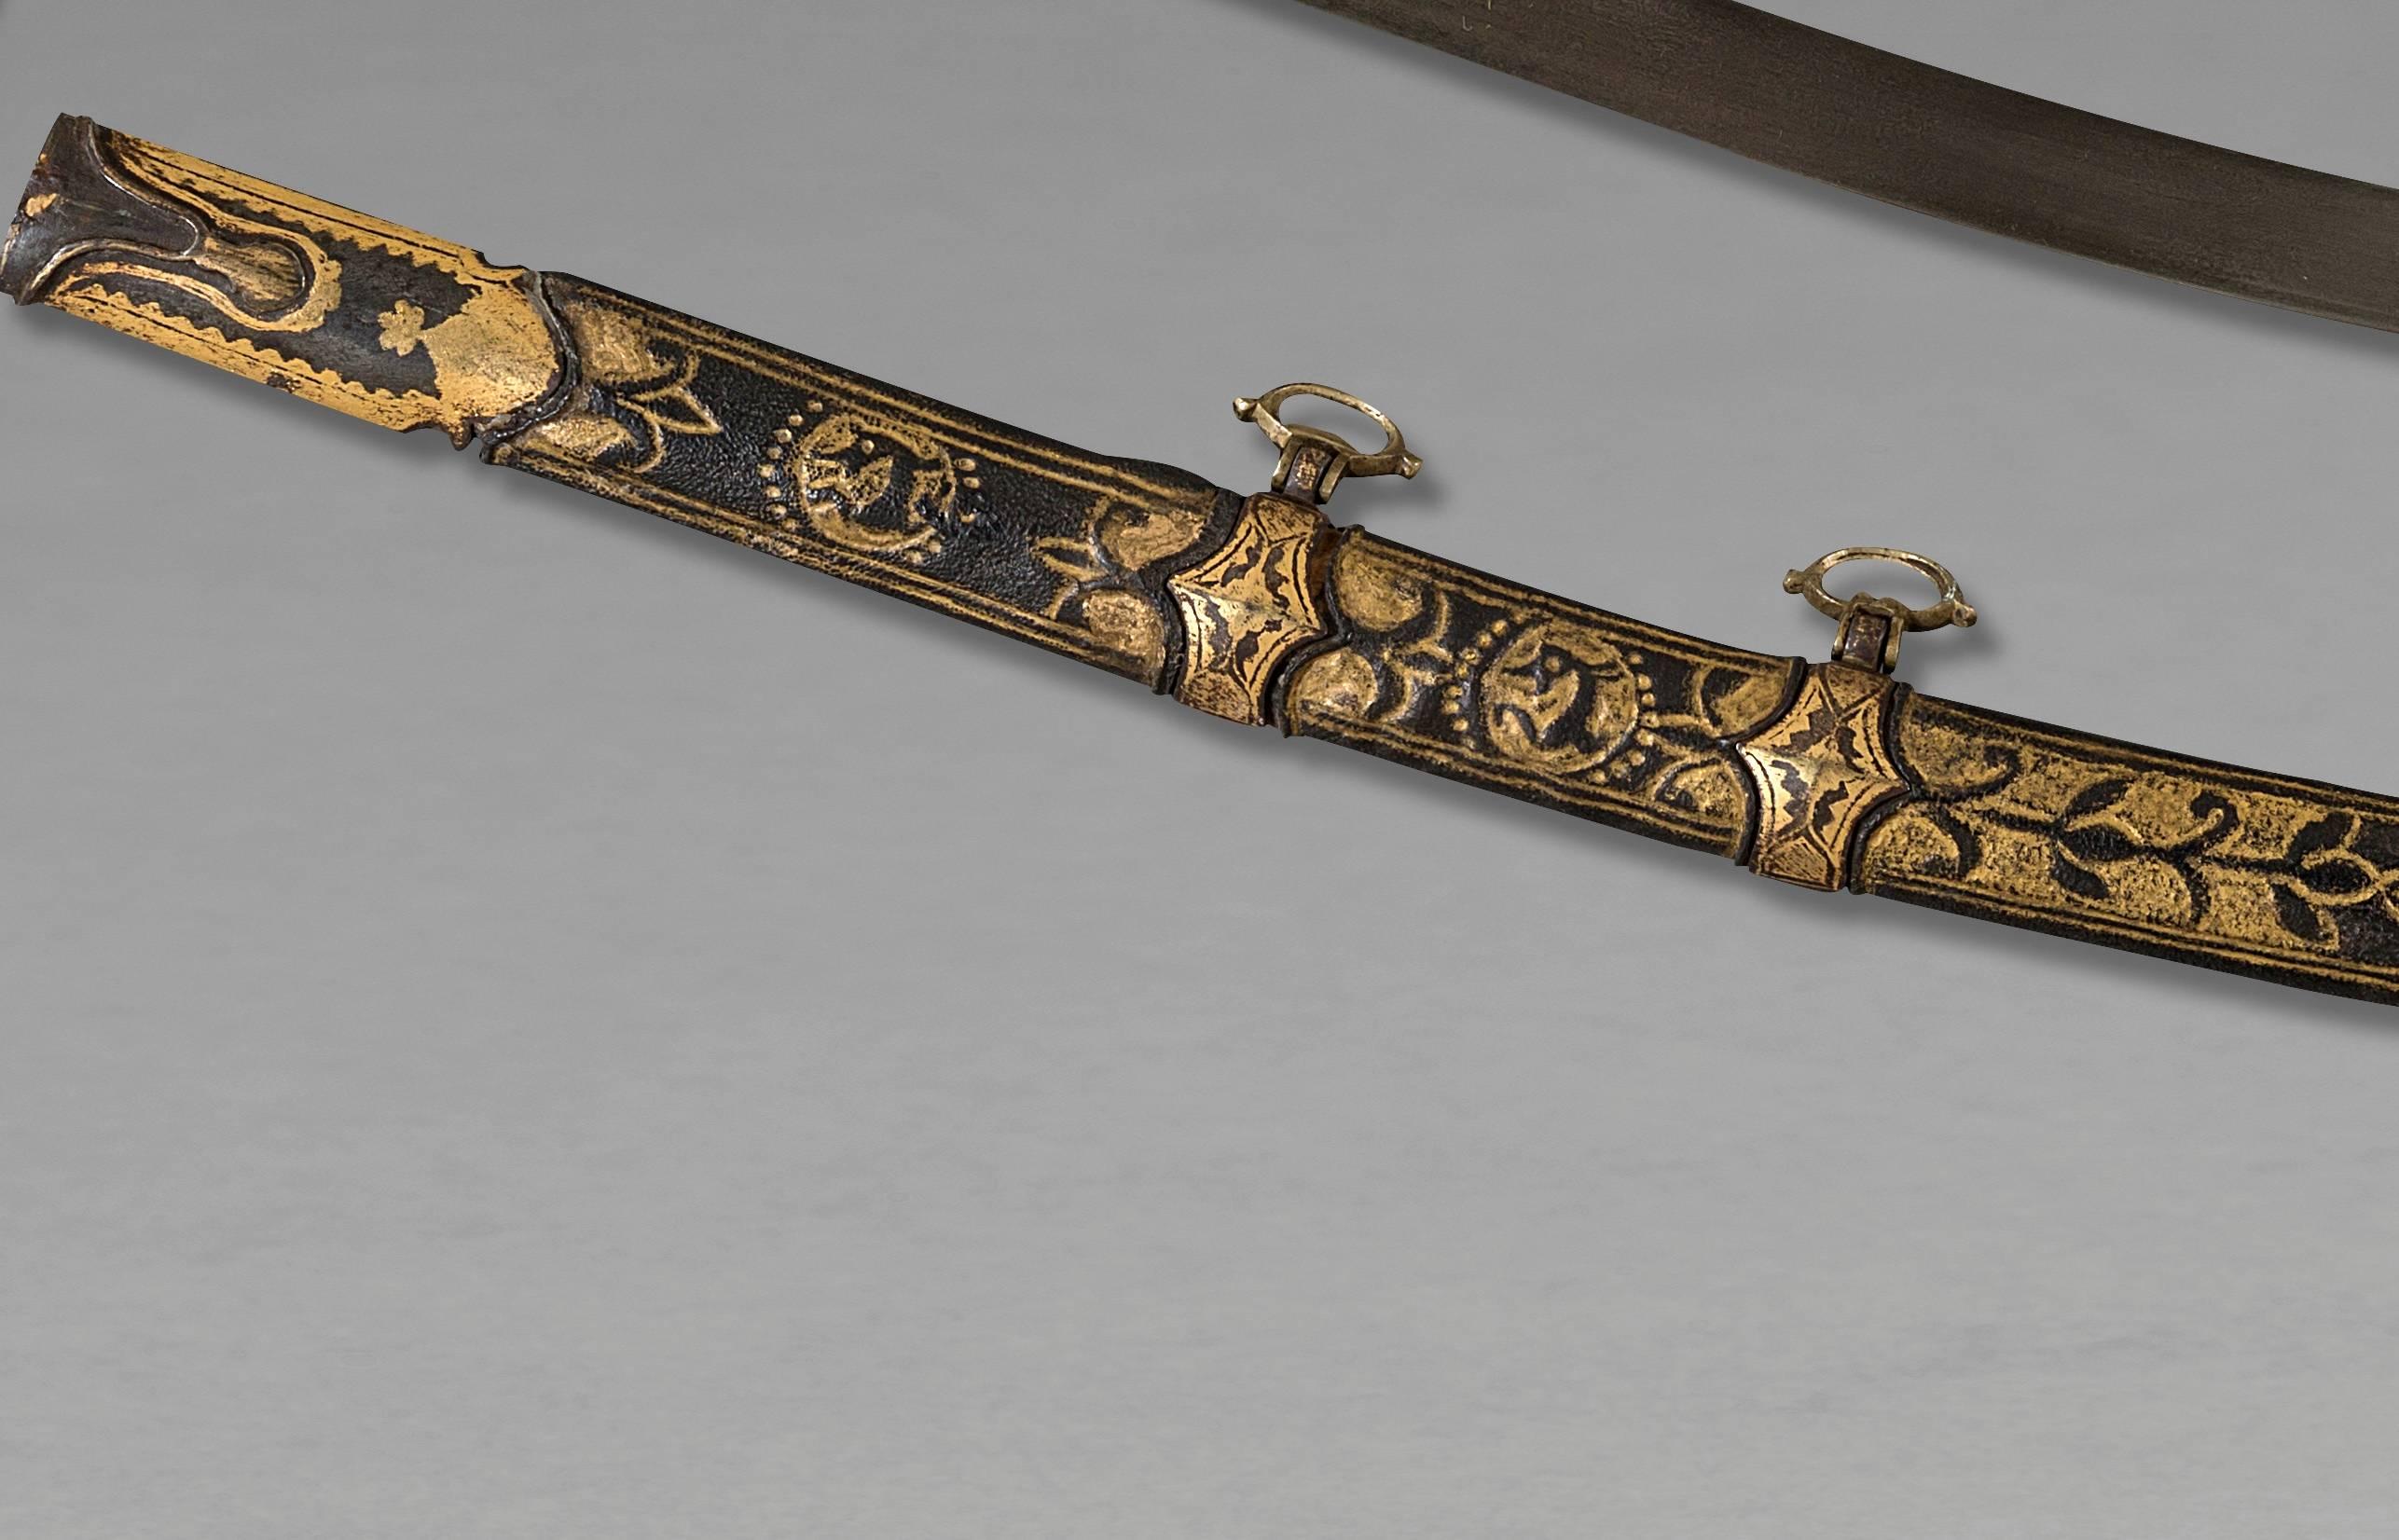 Oriental Saber, called Shamshir 
Ottoman Empire, late 18th century 

Handle in horn, steel mounted, Damascus blade, scabbard garnished of black leather with gold floral motif incrustations.

Whole saber: 40 1/5